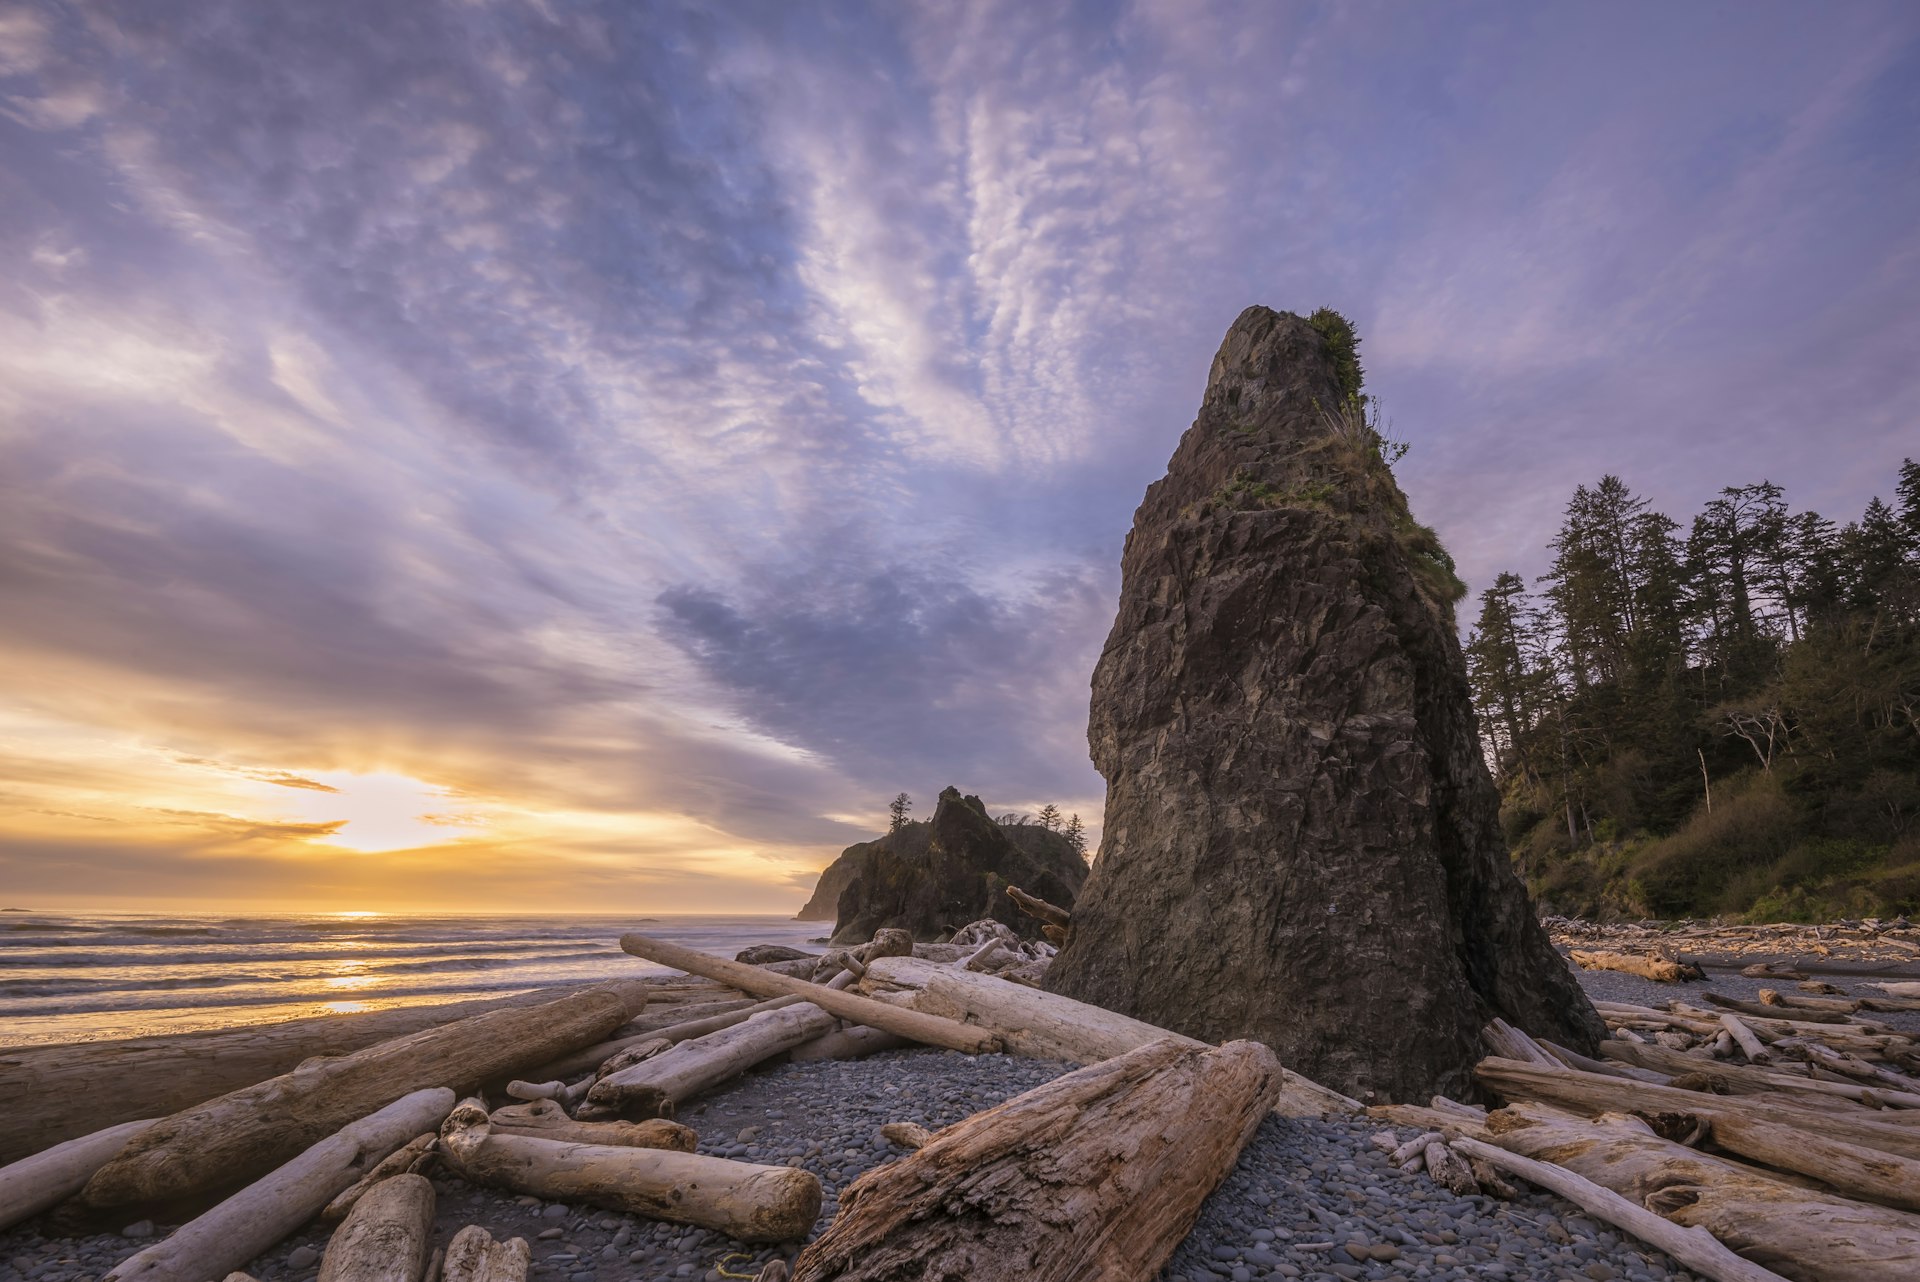 Driftwood, sea stack and sunset at Ruby Beach, Olympic National Park, Washington. 